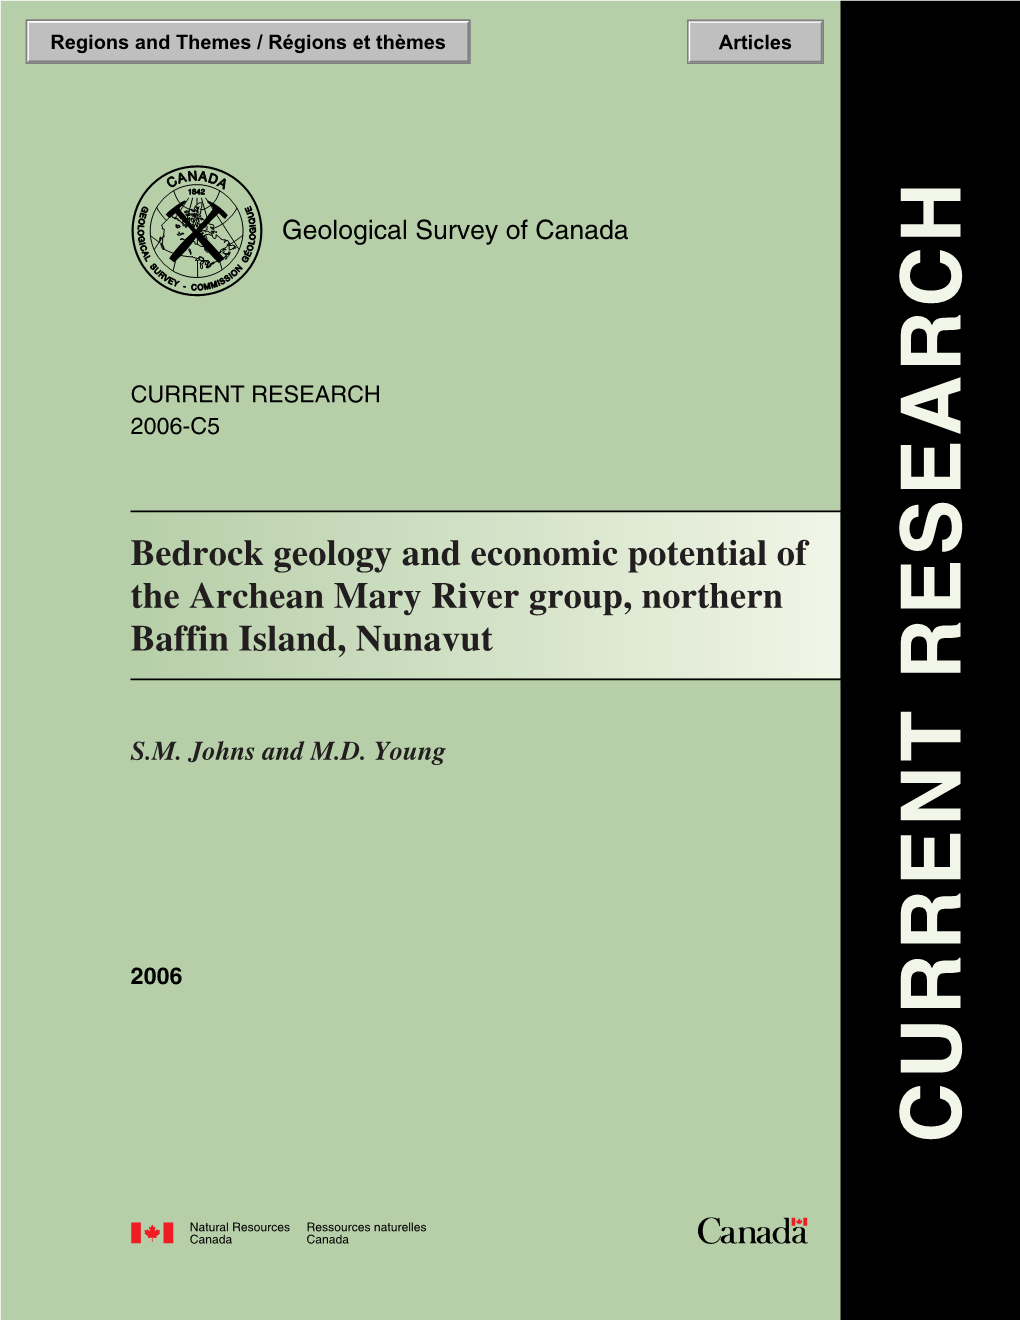 Bedrock Geology and Economic Potential of the Archean Mary River Group, Northern Baffin Island, Nunavut